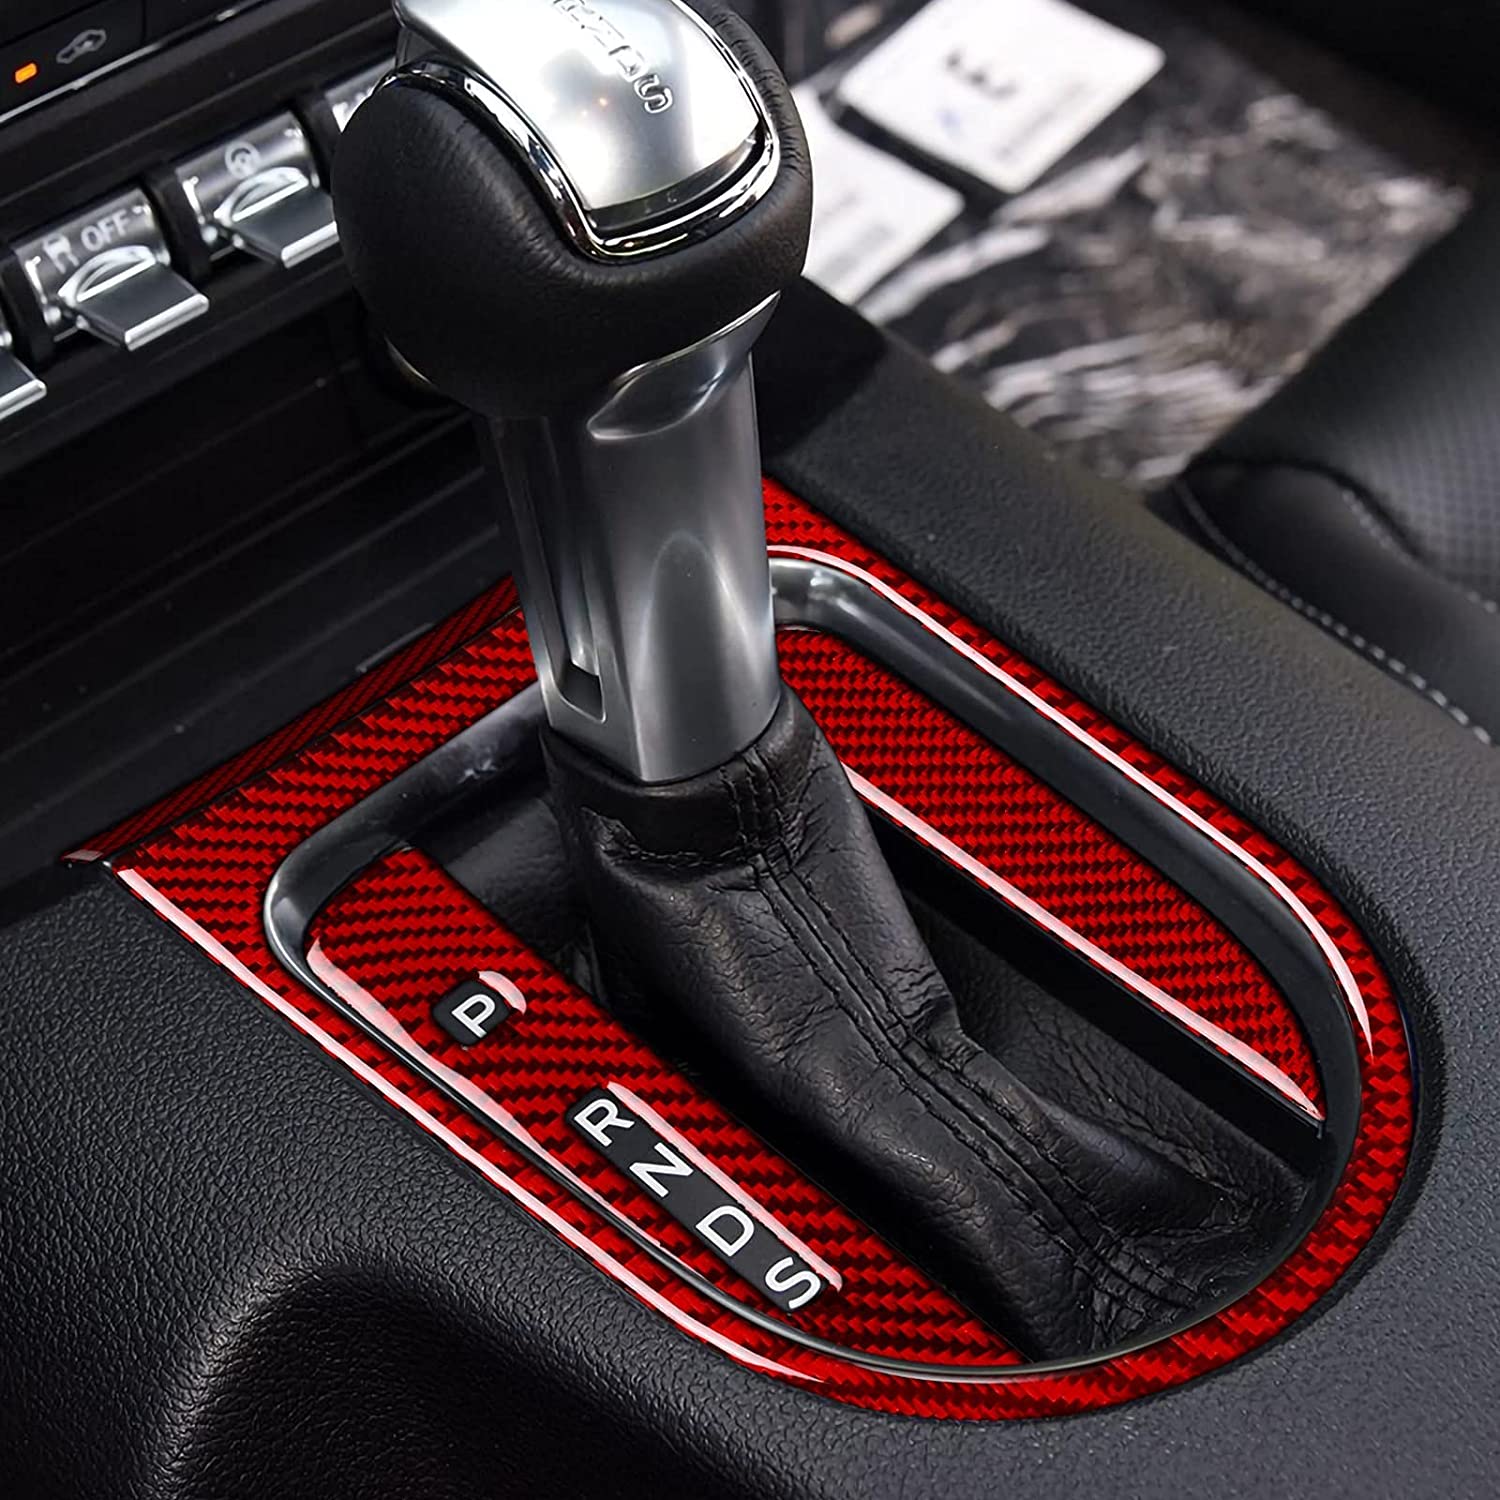 Car Gear Shift Panel Sticker Decal Carbon Fiber Interior Trim Cover Compatible with Mustang 2015 2016 2017 2018 2019 2020 Accessories